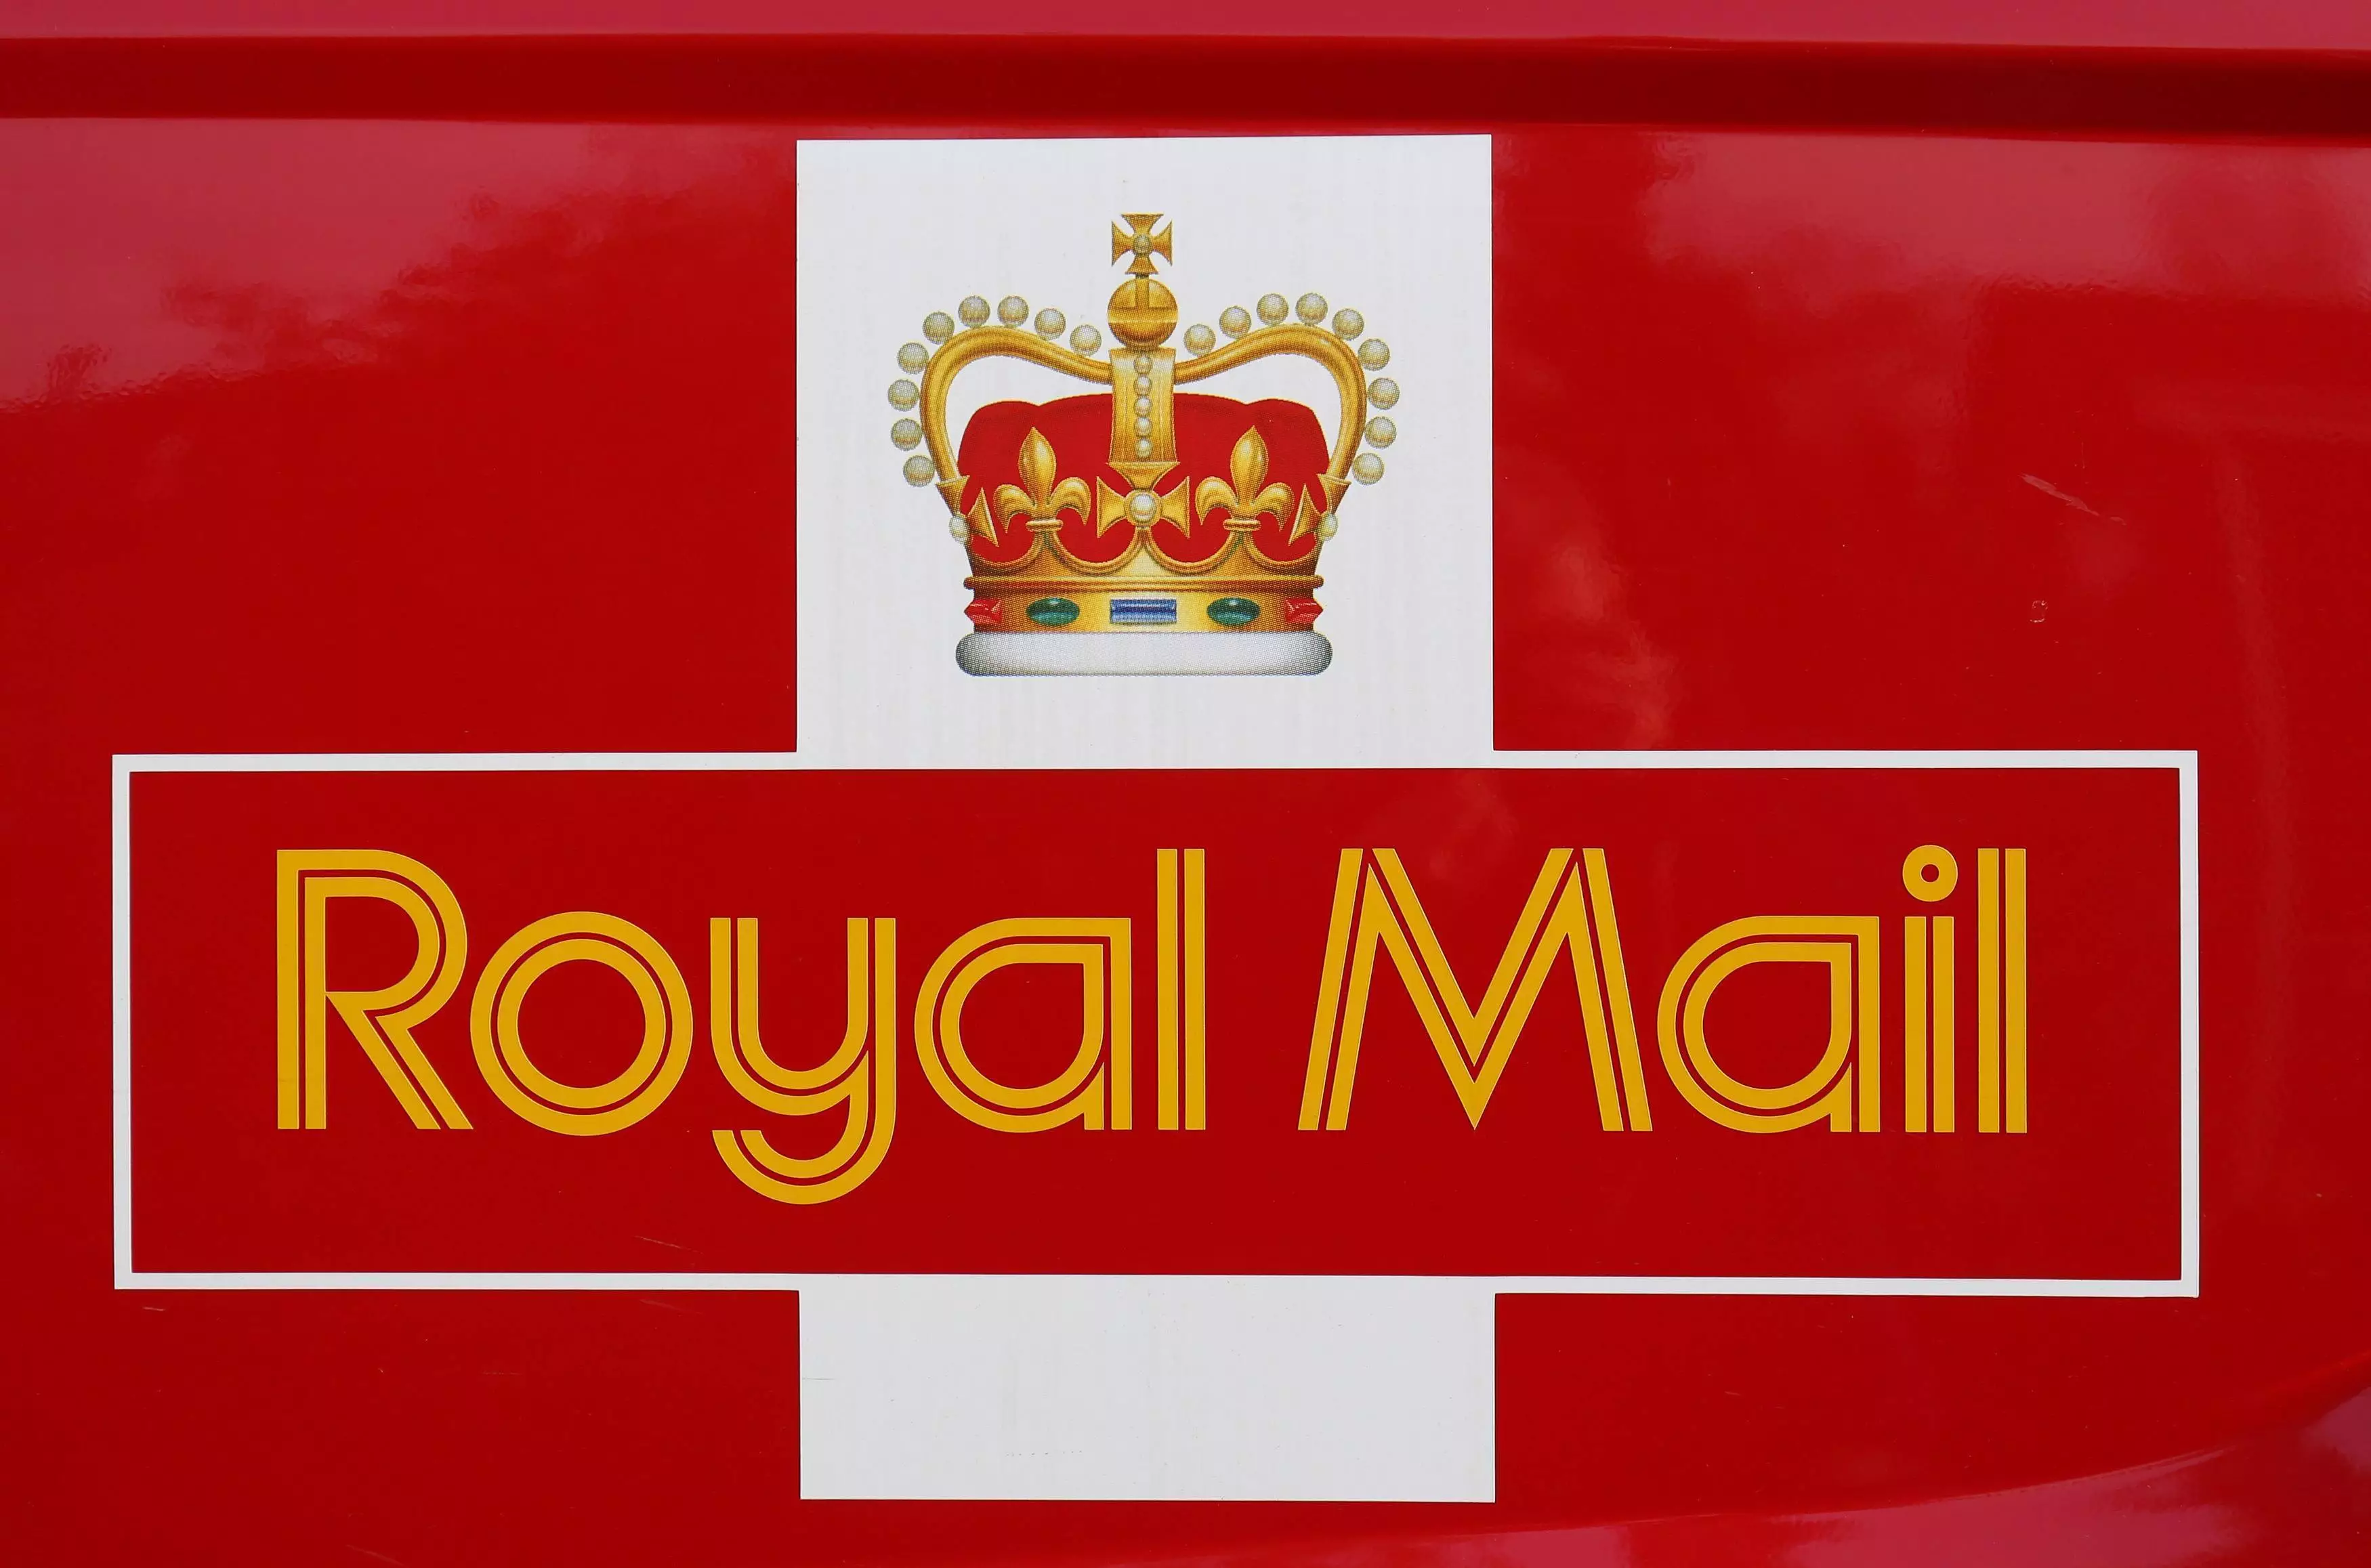 Royal Mail have issued a statement (